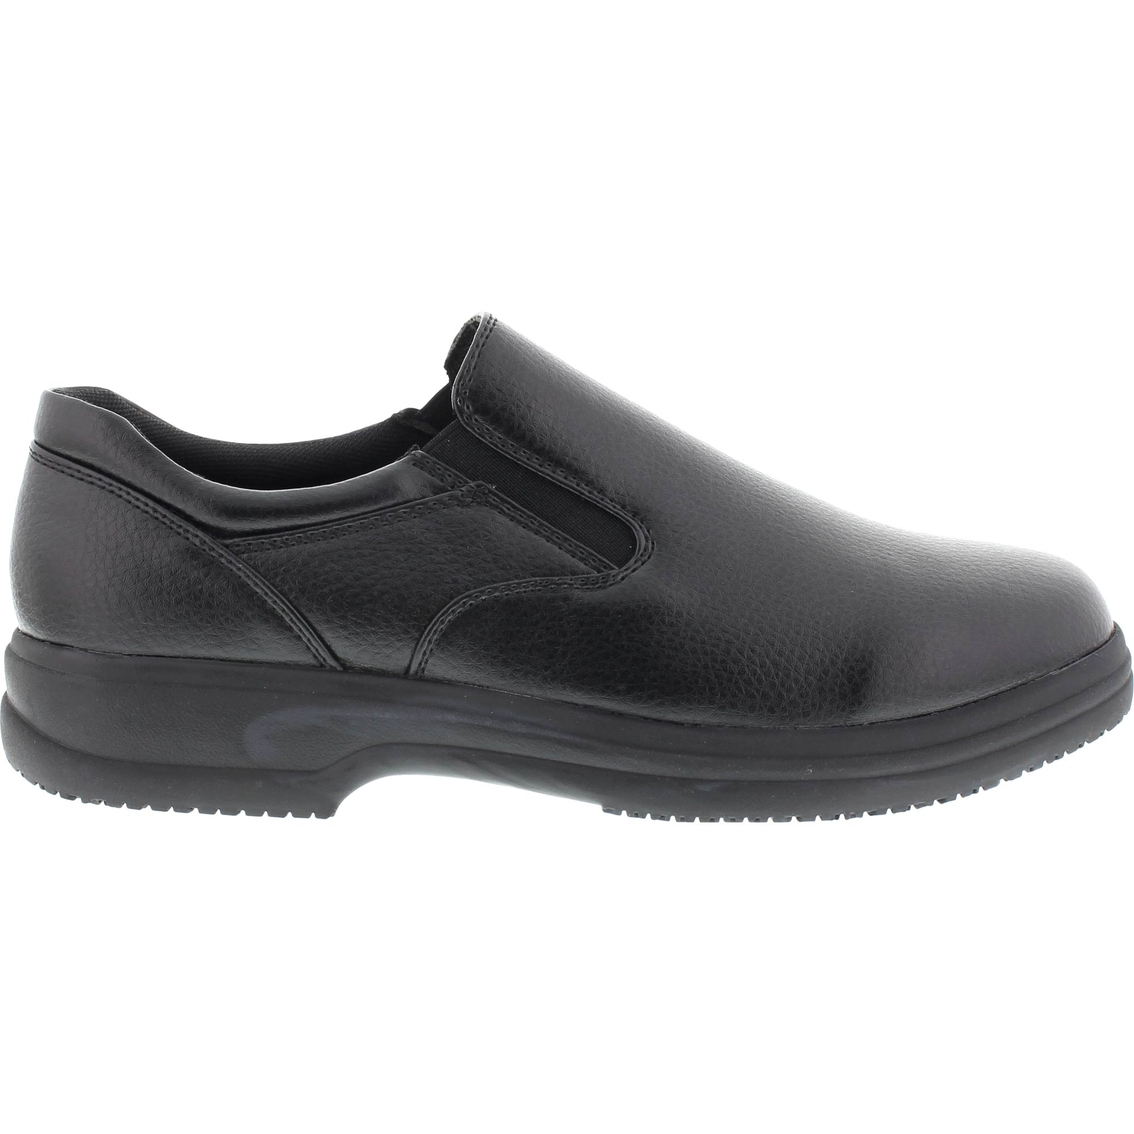 Deer Stags Manager Utility Slip On Shoes - Image 2 of 4